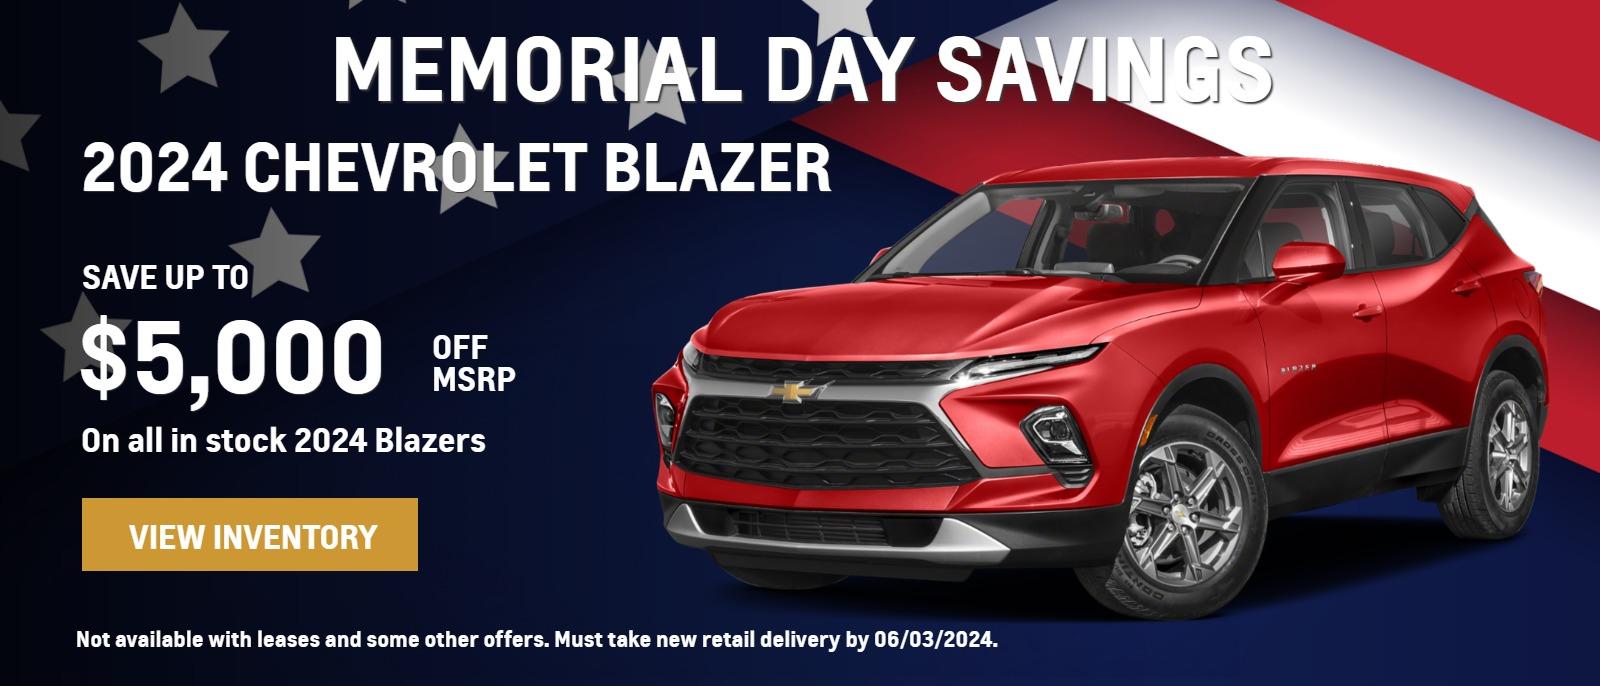 MEMORIAL DAY SAVINGS 2024 Blazer. SAVE UP TO $5,000 OFF MSRP On all in stock Blazers. Not available with leases and some other offers. Must take new retail delivery by 06/03/2024.